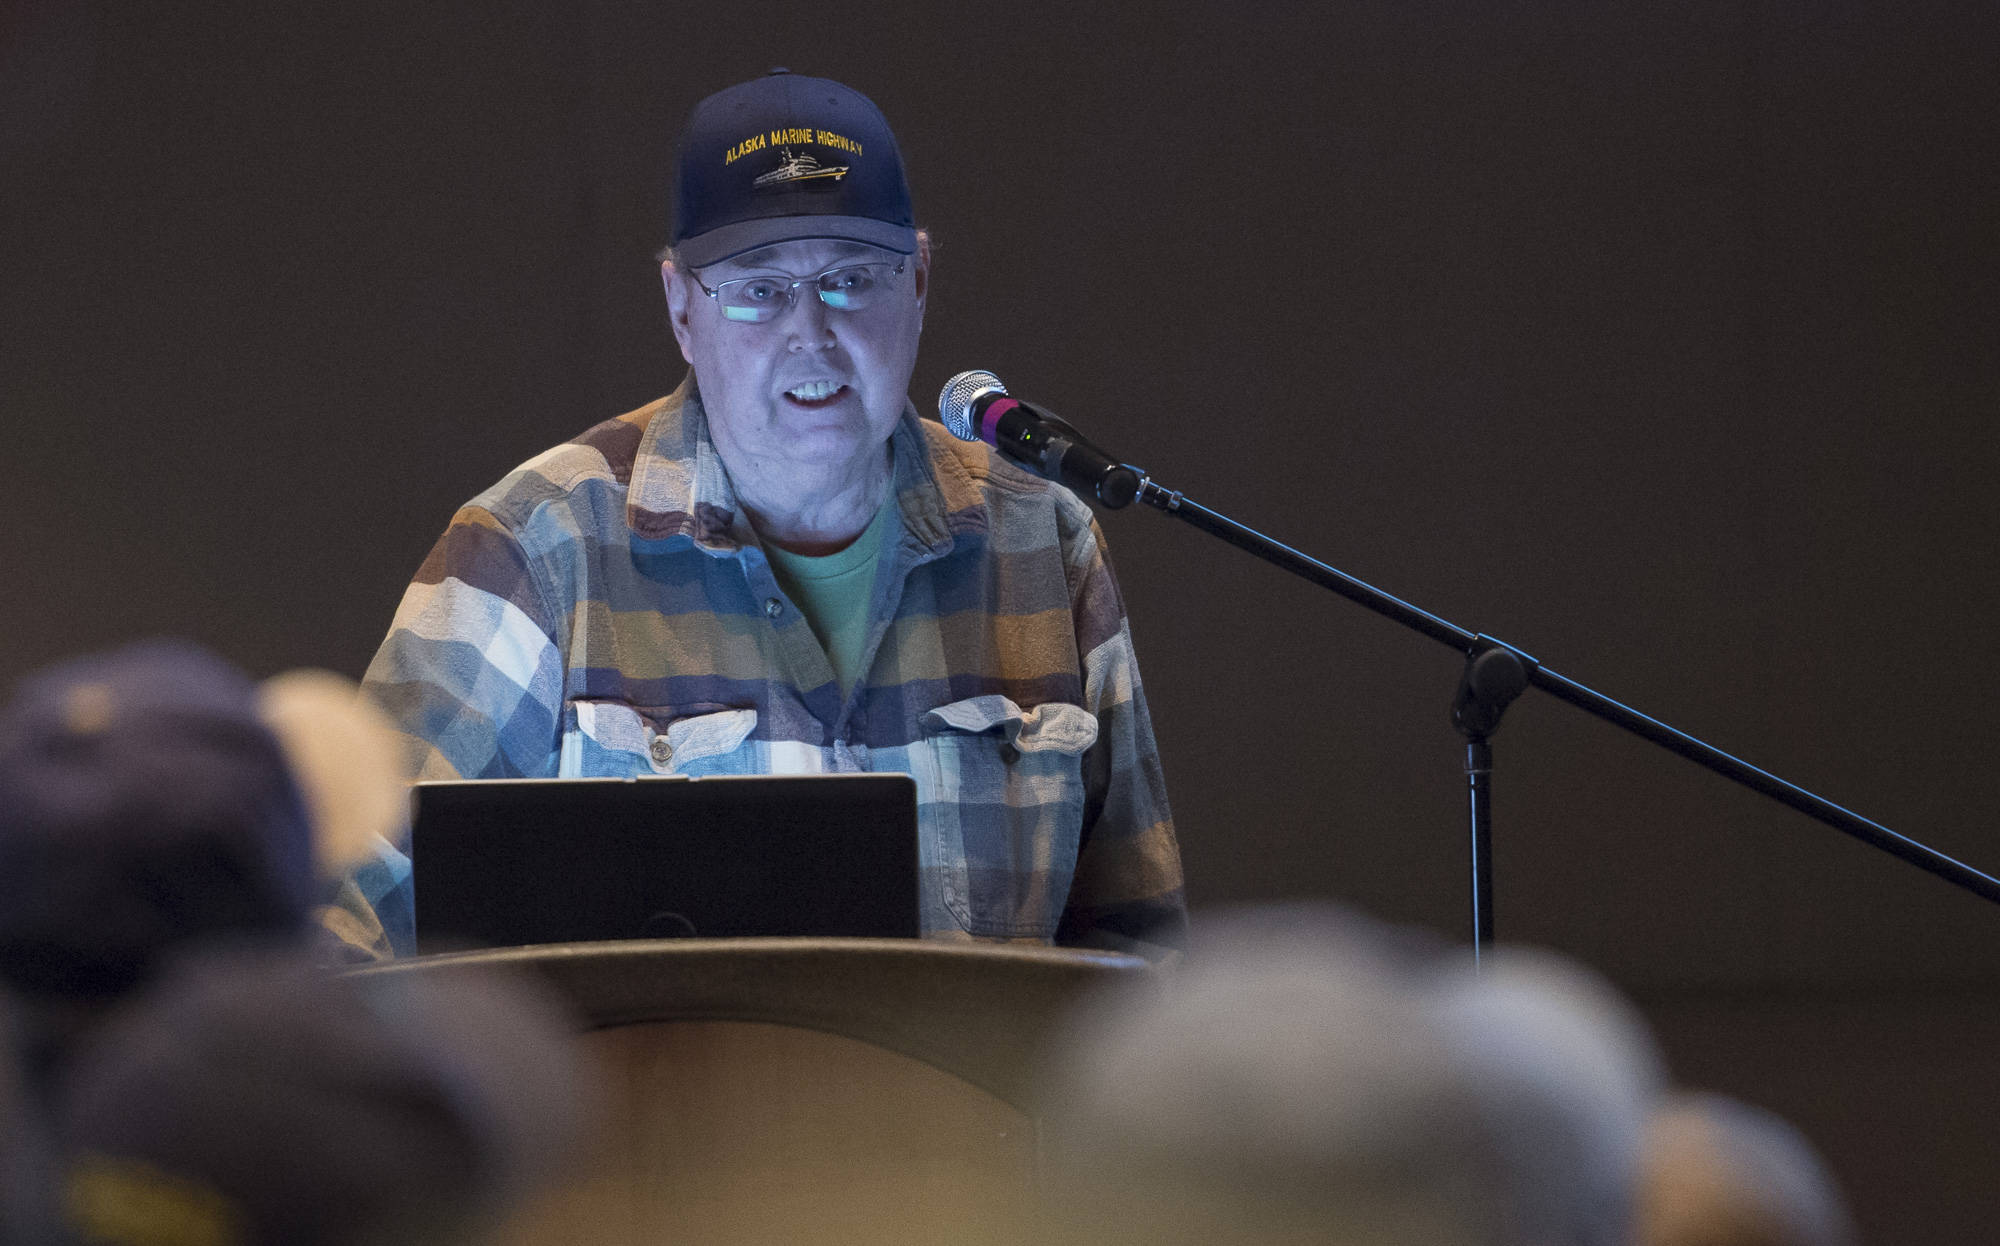 Larry Edfelt, chair of the Fisheries Committee of Territorial Sportsmen Inc., speaks at the King Salmon Symposium sponsored by the Territorial Sportsmen at Centennial Hall on Monday, April 16, 2018.